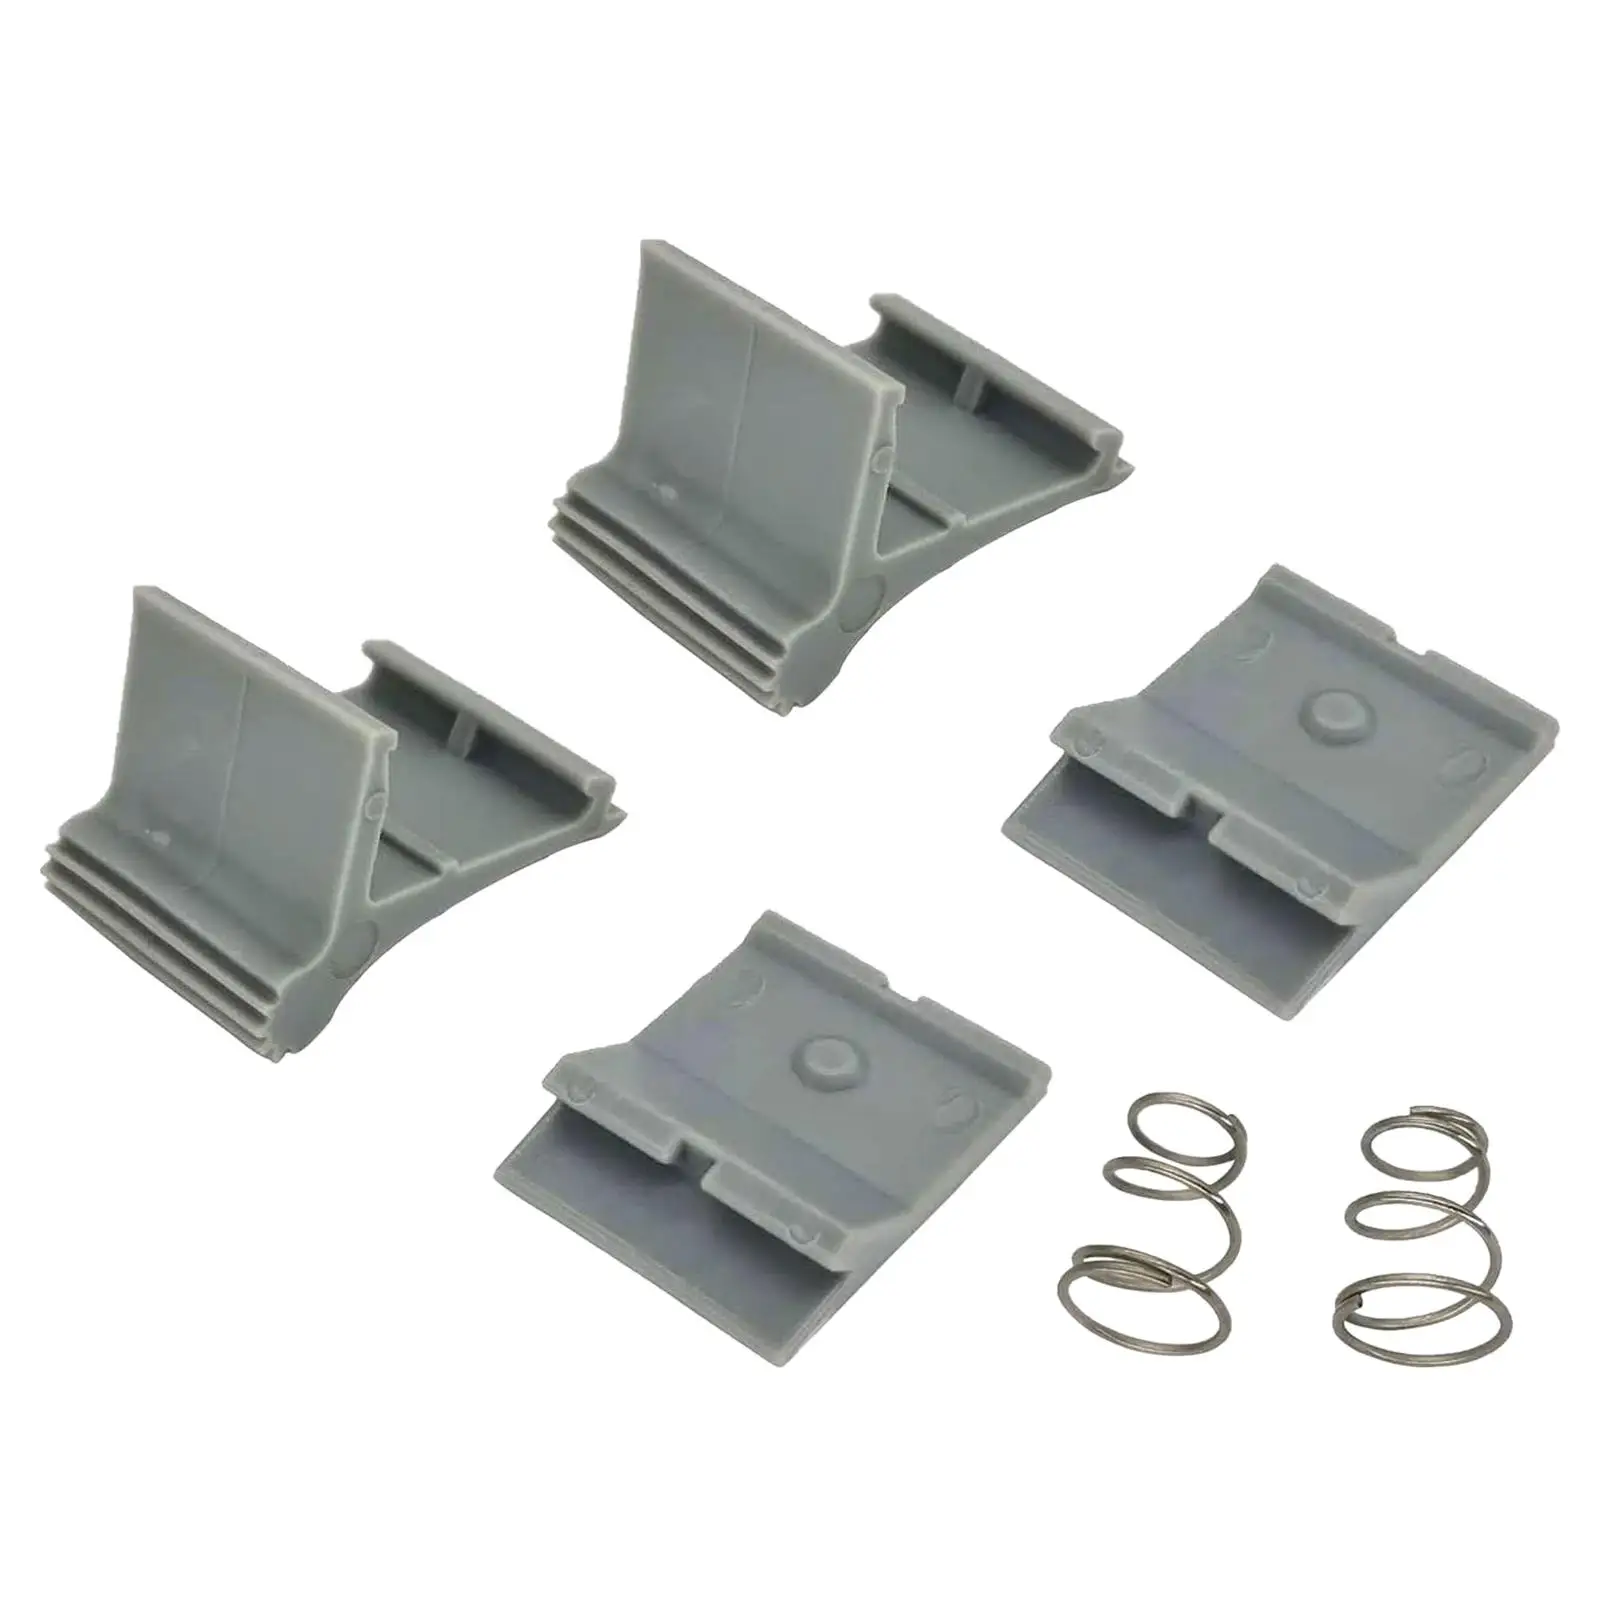 RV Awning Arm Slider Catch Set Repair Parts Durable Assembly Accessory Easy